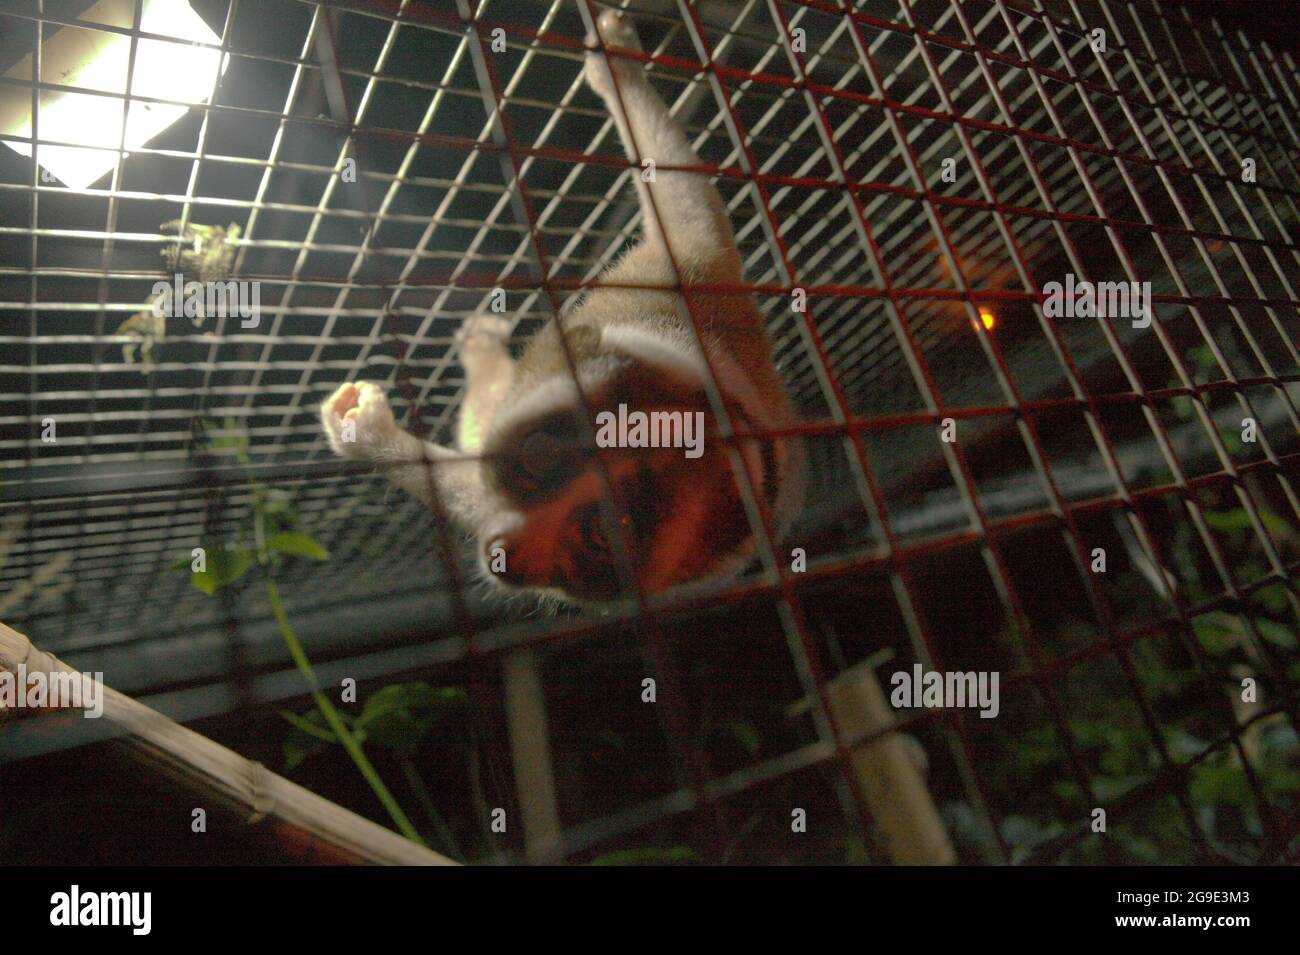 Slow loris at wildlife rehabilitation centre facility operated by International Animal Rescue (IAR) in Ciapus, Bogor, West Java, Indonesia. The primate was rescued from wildlife trade activity and is in a transition phase, which is to make it ready to be released into the wild. Slow loris is a nocturnal species, venomous, and could transmit zoonotic diseases to human. The primates do not have characteristics as pets, according to scientists, so they will be likely dead in human captivity. Stock Photo